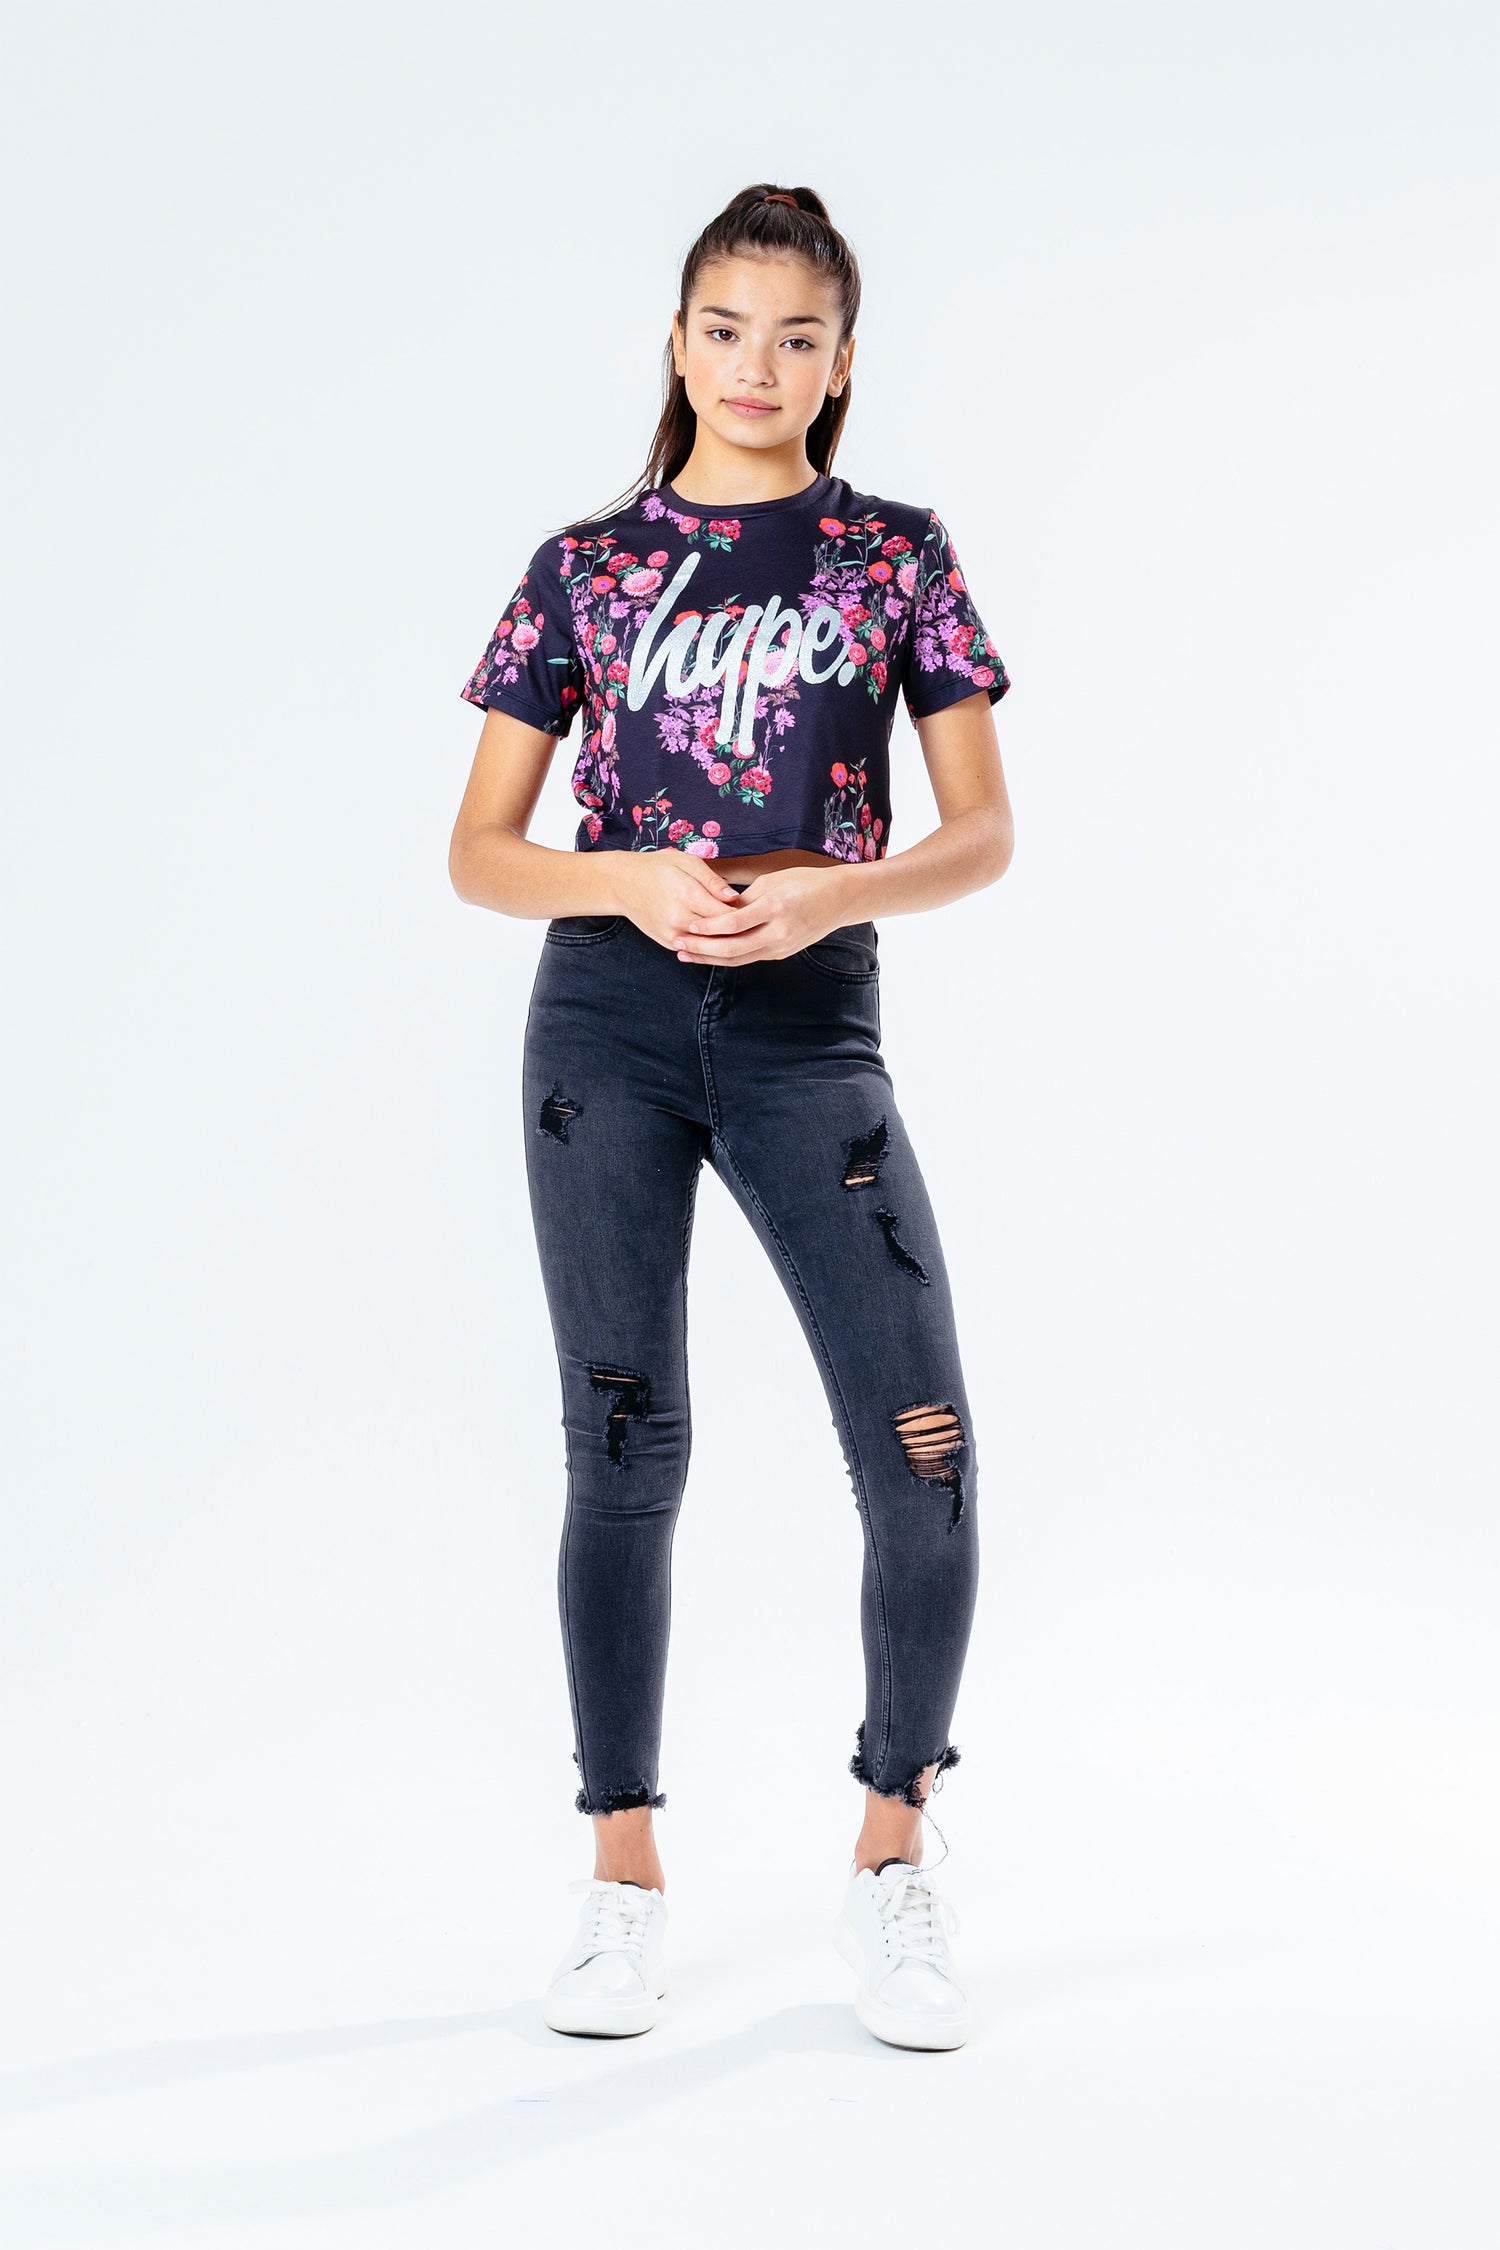 HYPE DITSY FLORAL GIRLS CROP T-SHIRT